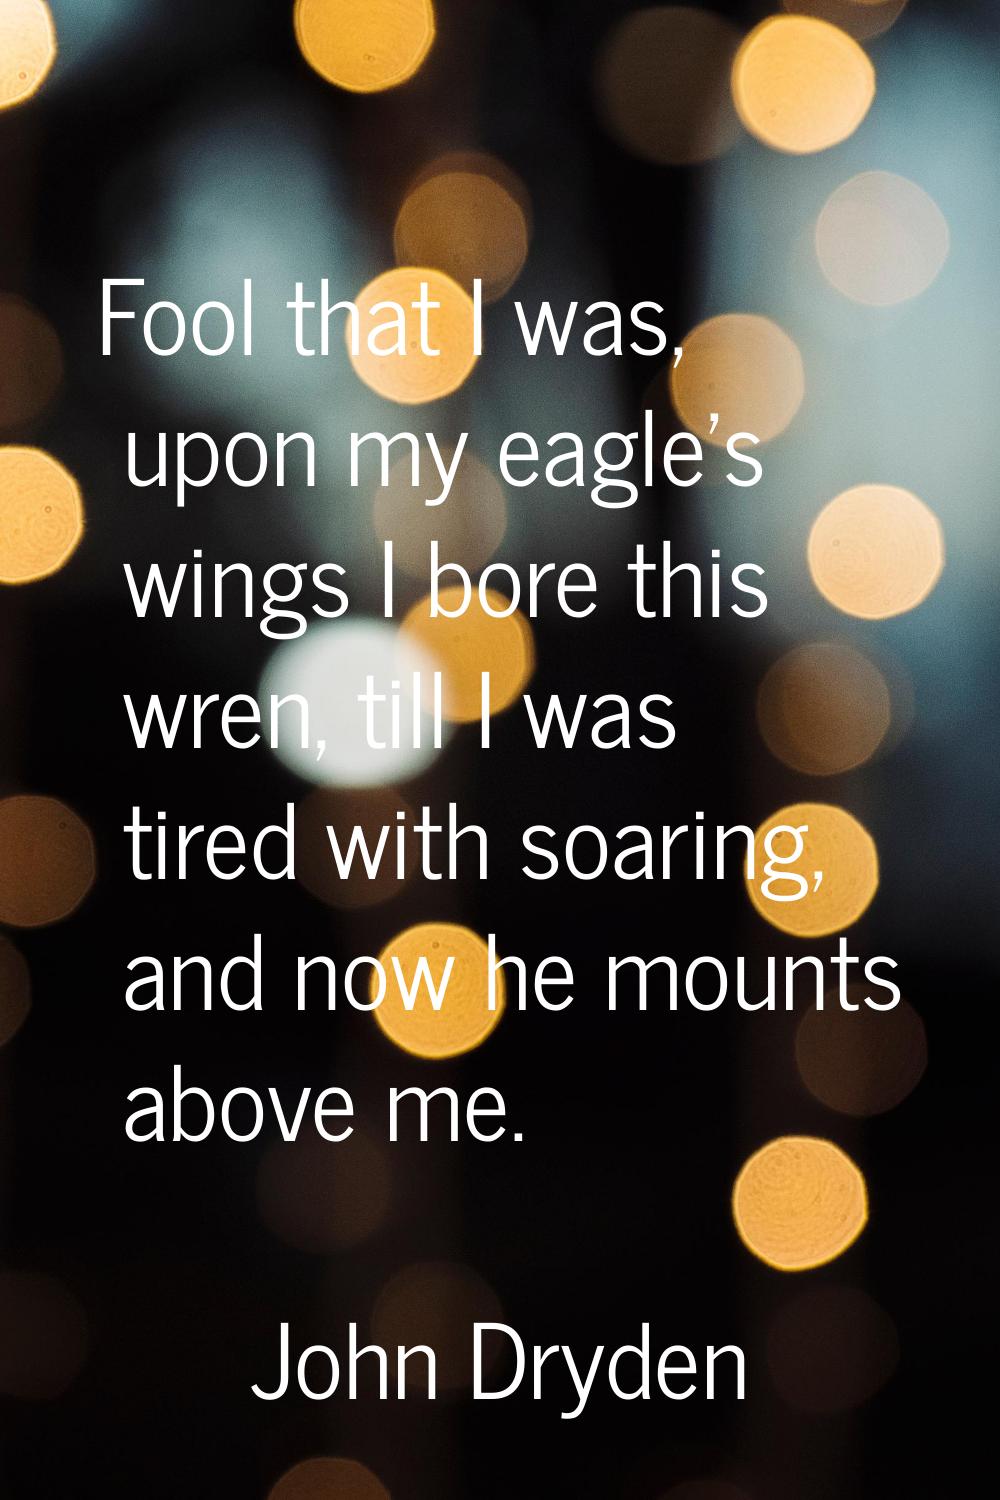 Fool that I was, upon my eagle's wings I bore this wren, till I was tired with soaring, and now he 